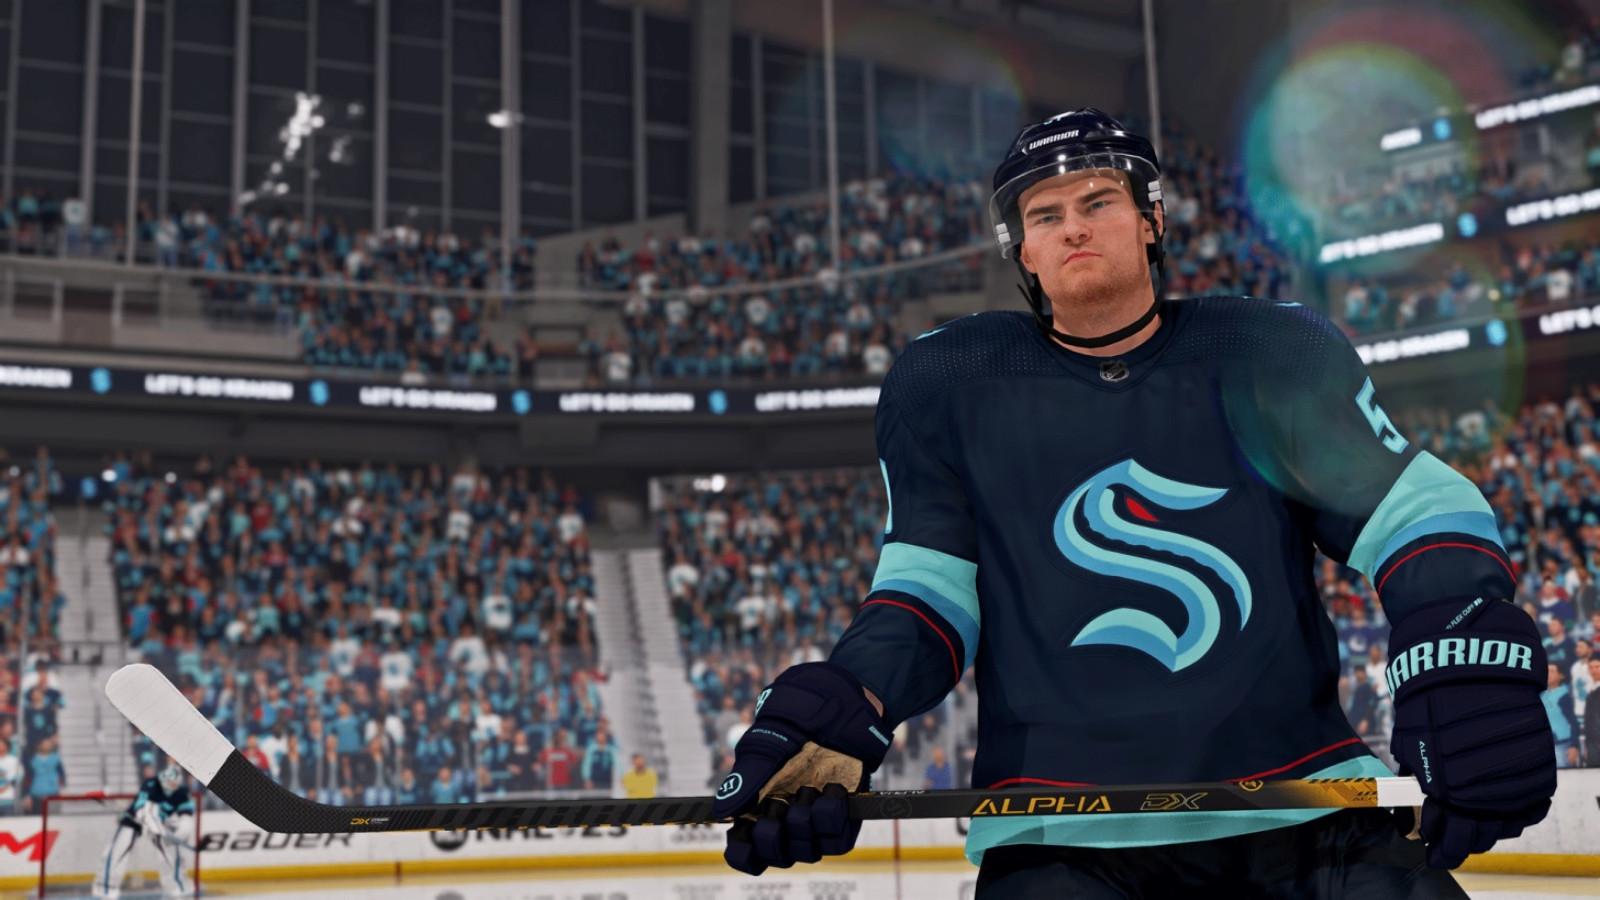 Game review: EA Sports NHL 21